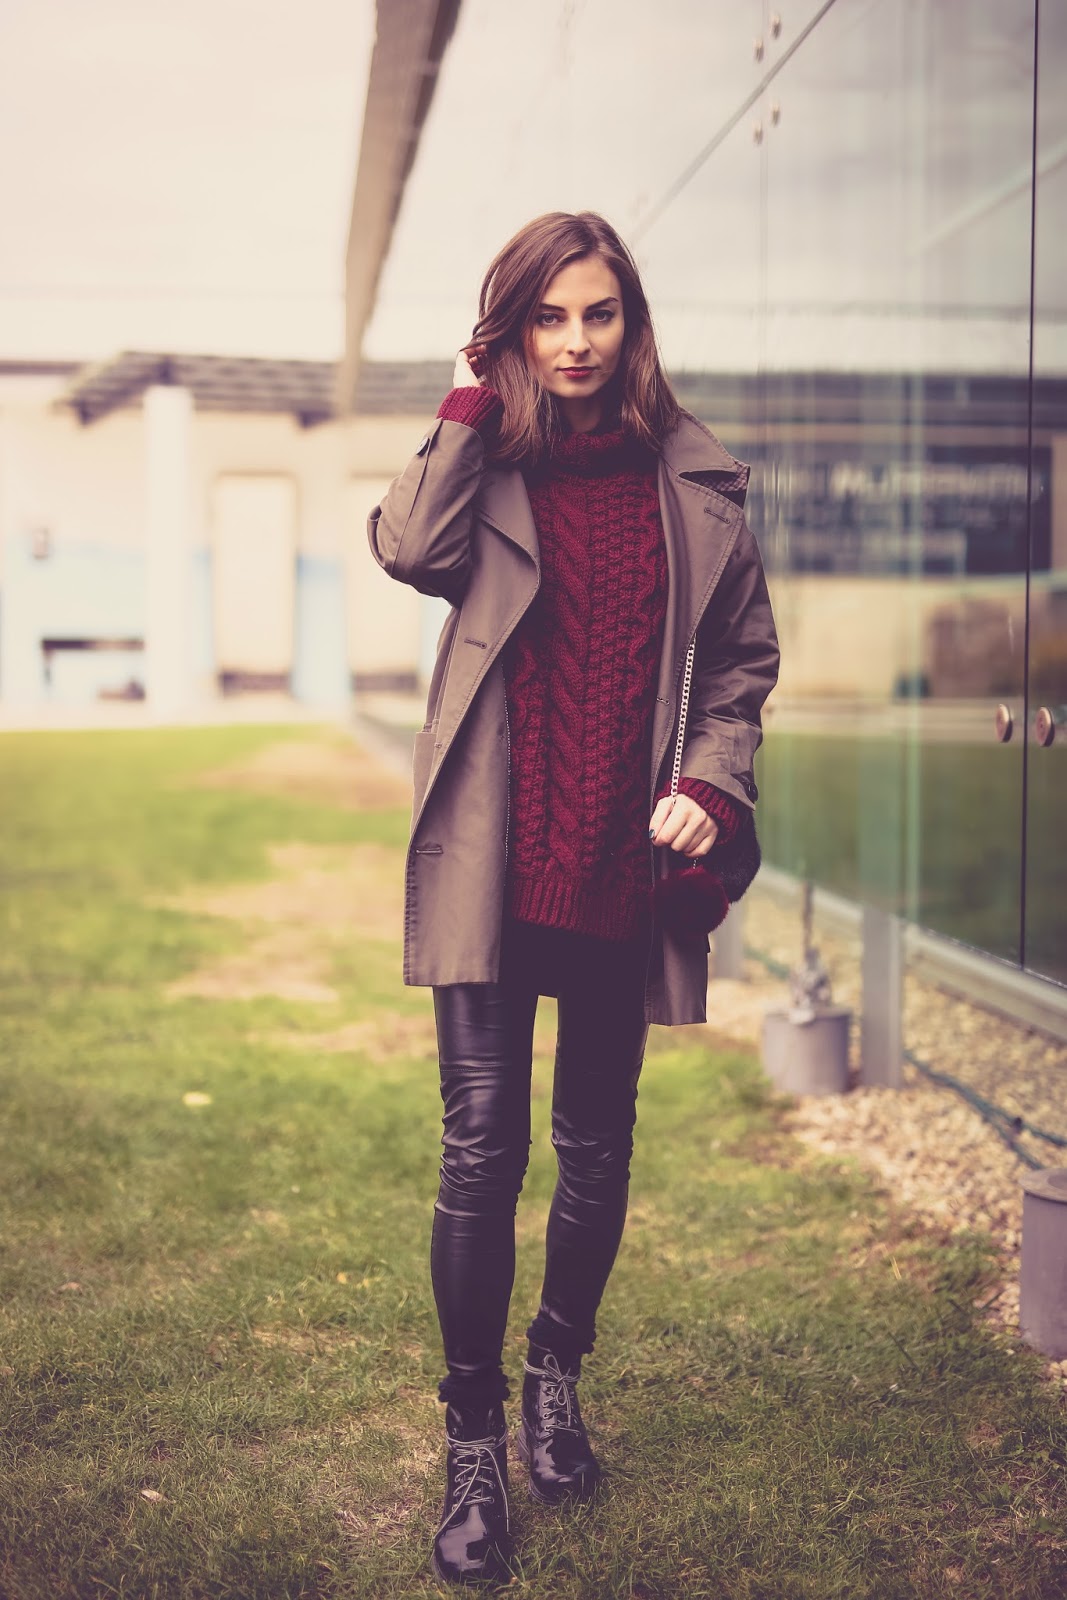 Outfit for rainy days, knitwear, burgundy, autumn, fall, chunky knit, leather pants, trousers, caterpillar boots, patent leather shoes, millitary coat, mango, zara, h&m, lipstick, style blog, fasion, ootd, lookof the day, street style, aw15